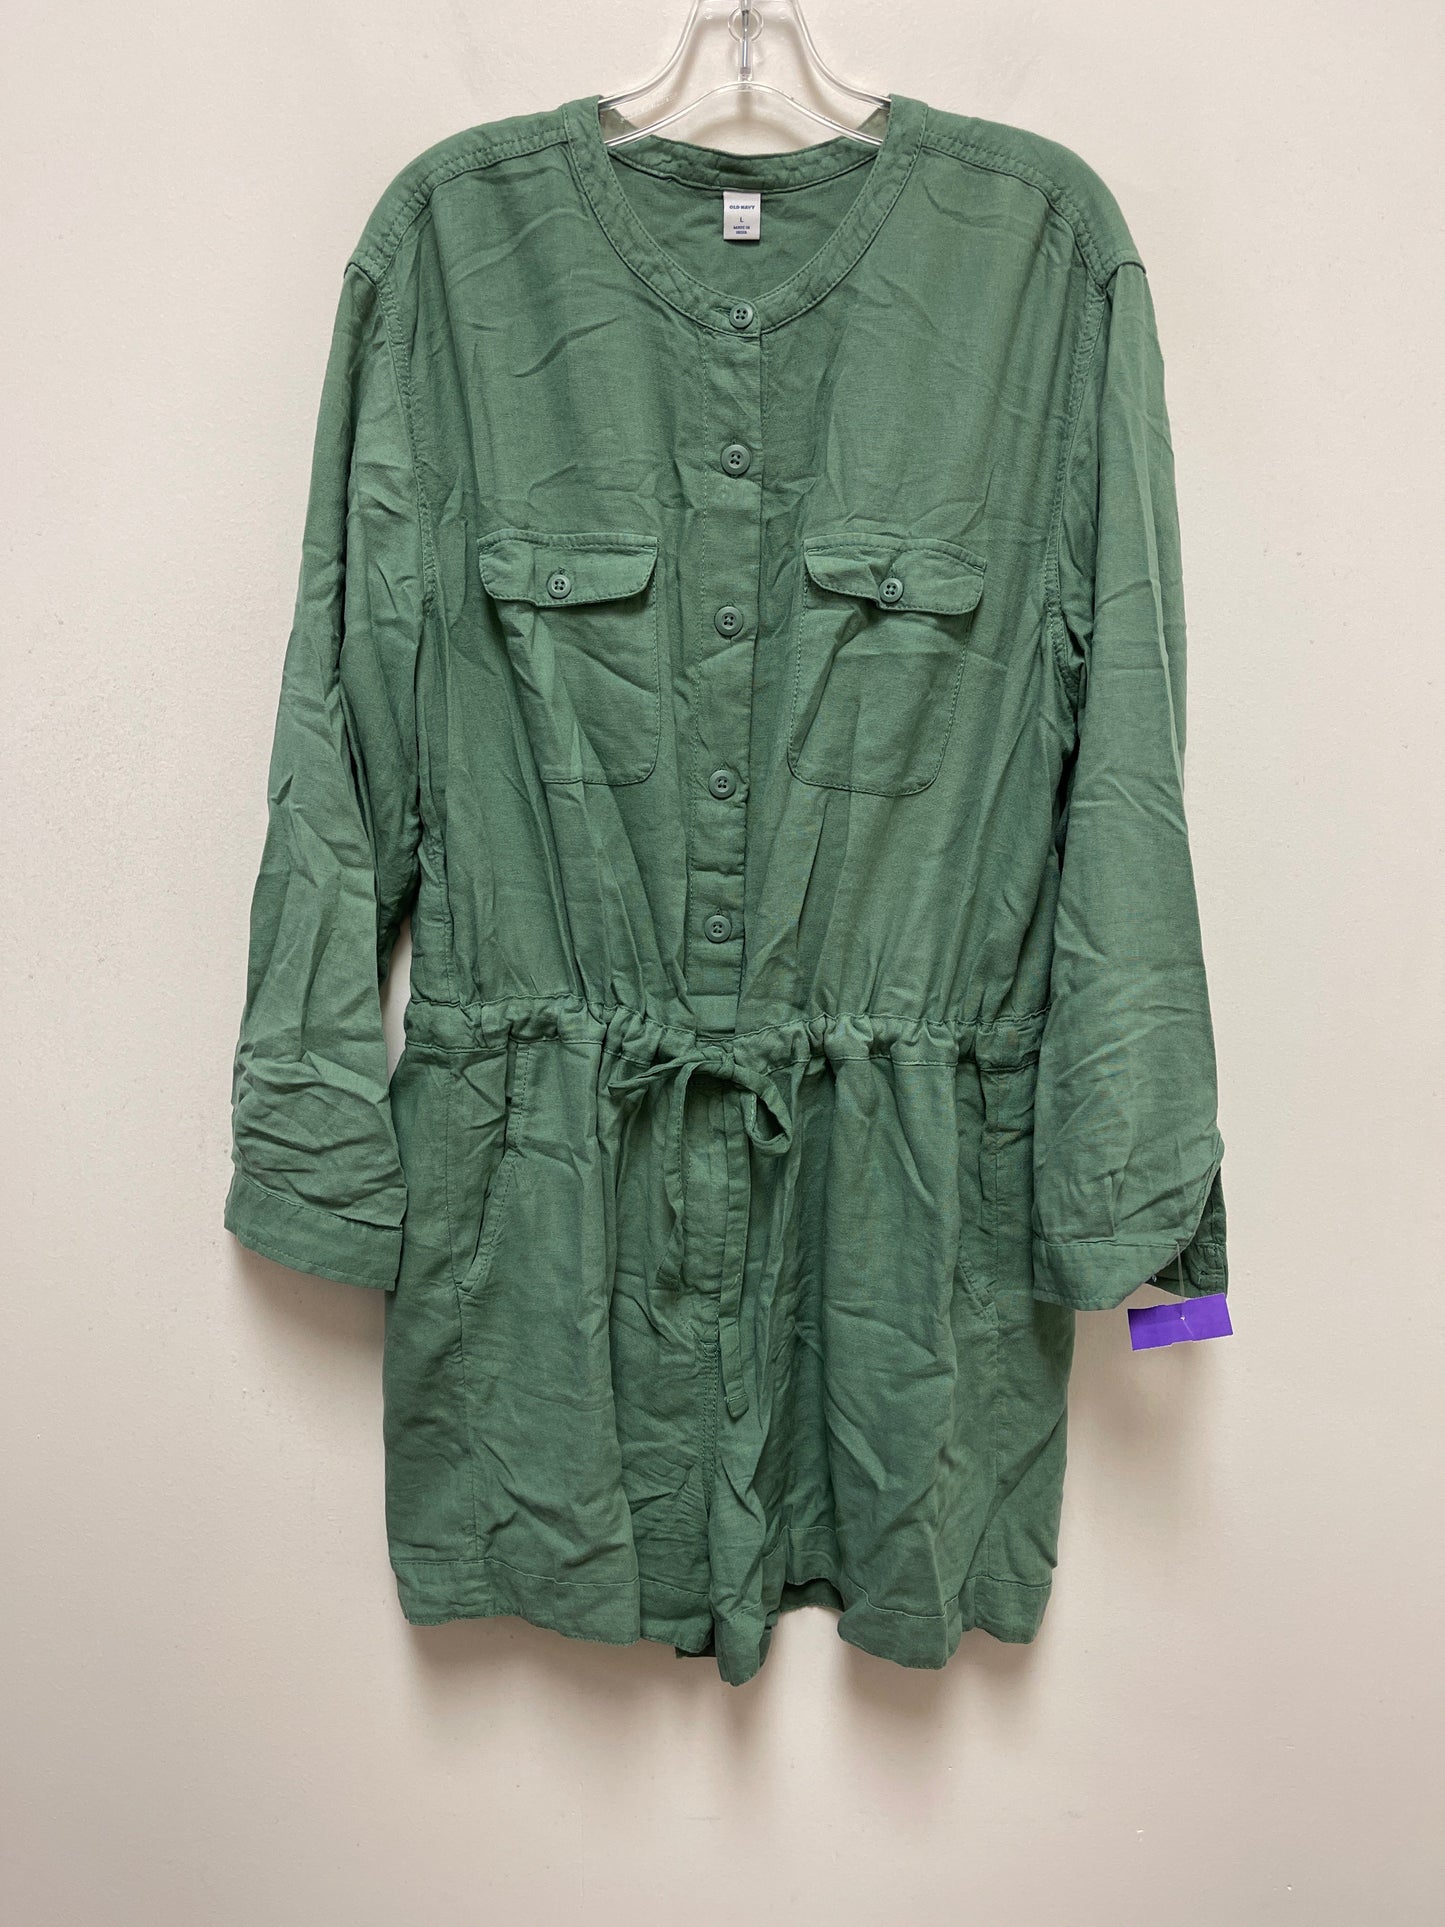 Green Romper Old Navy, Size L